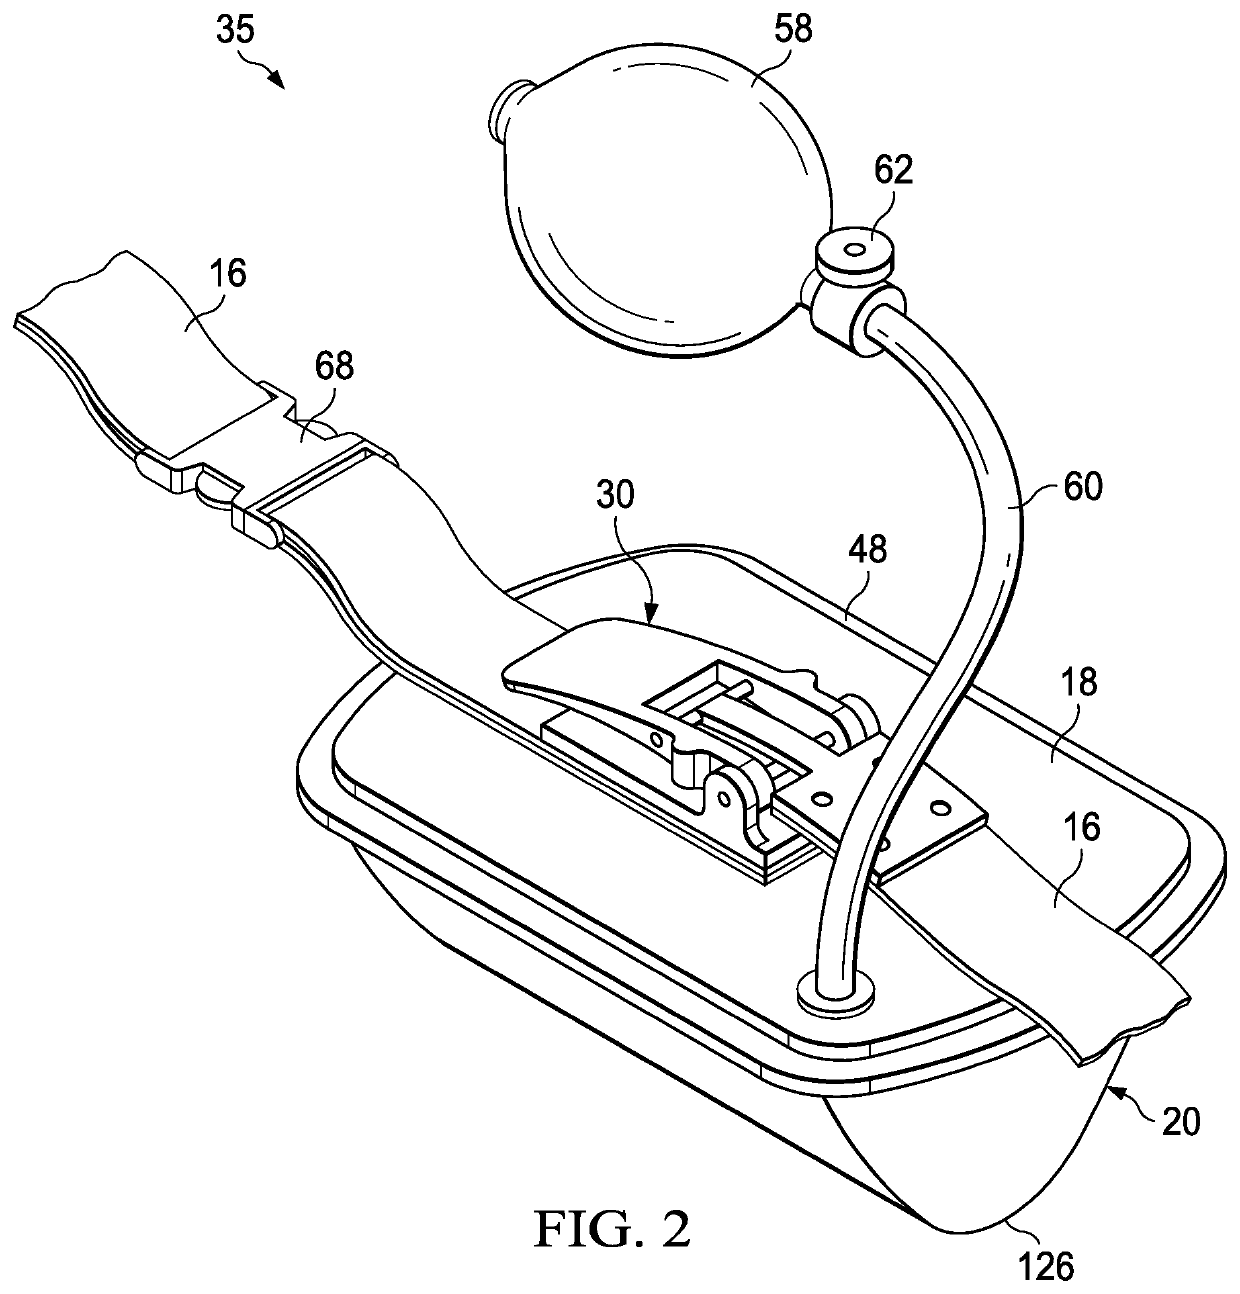 Device to increase intra-abdominal compartment pressure for the controlling of internal hemorrhage